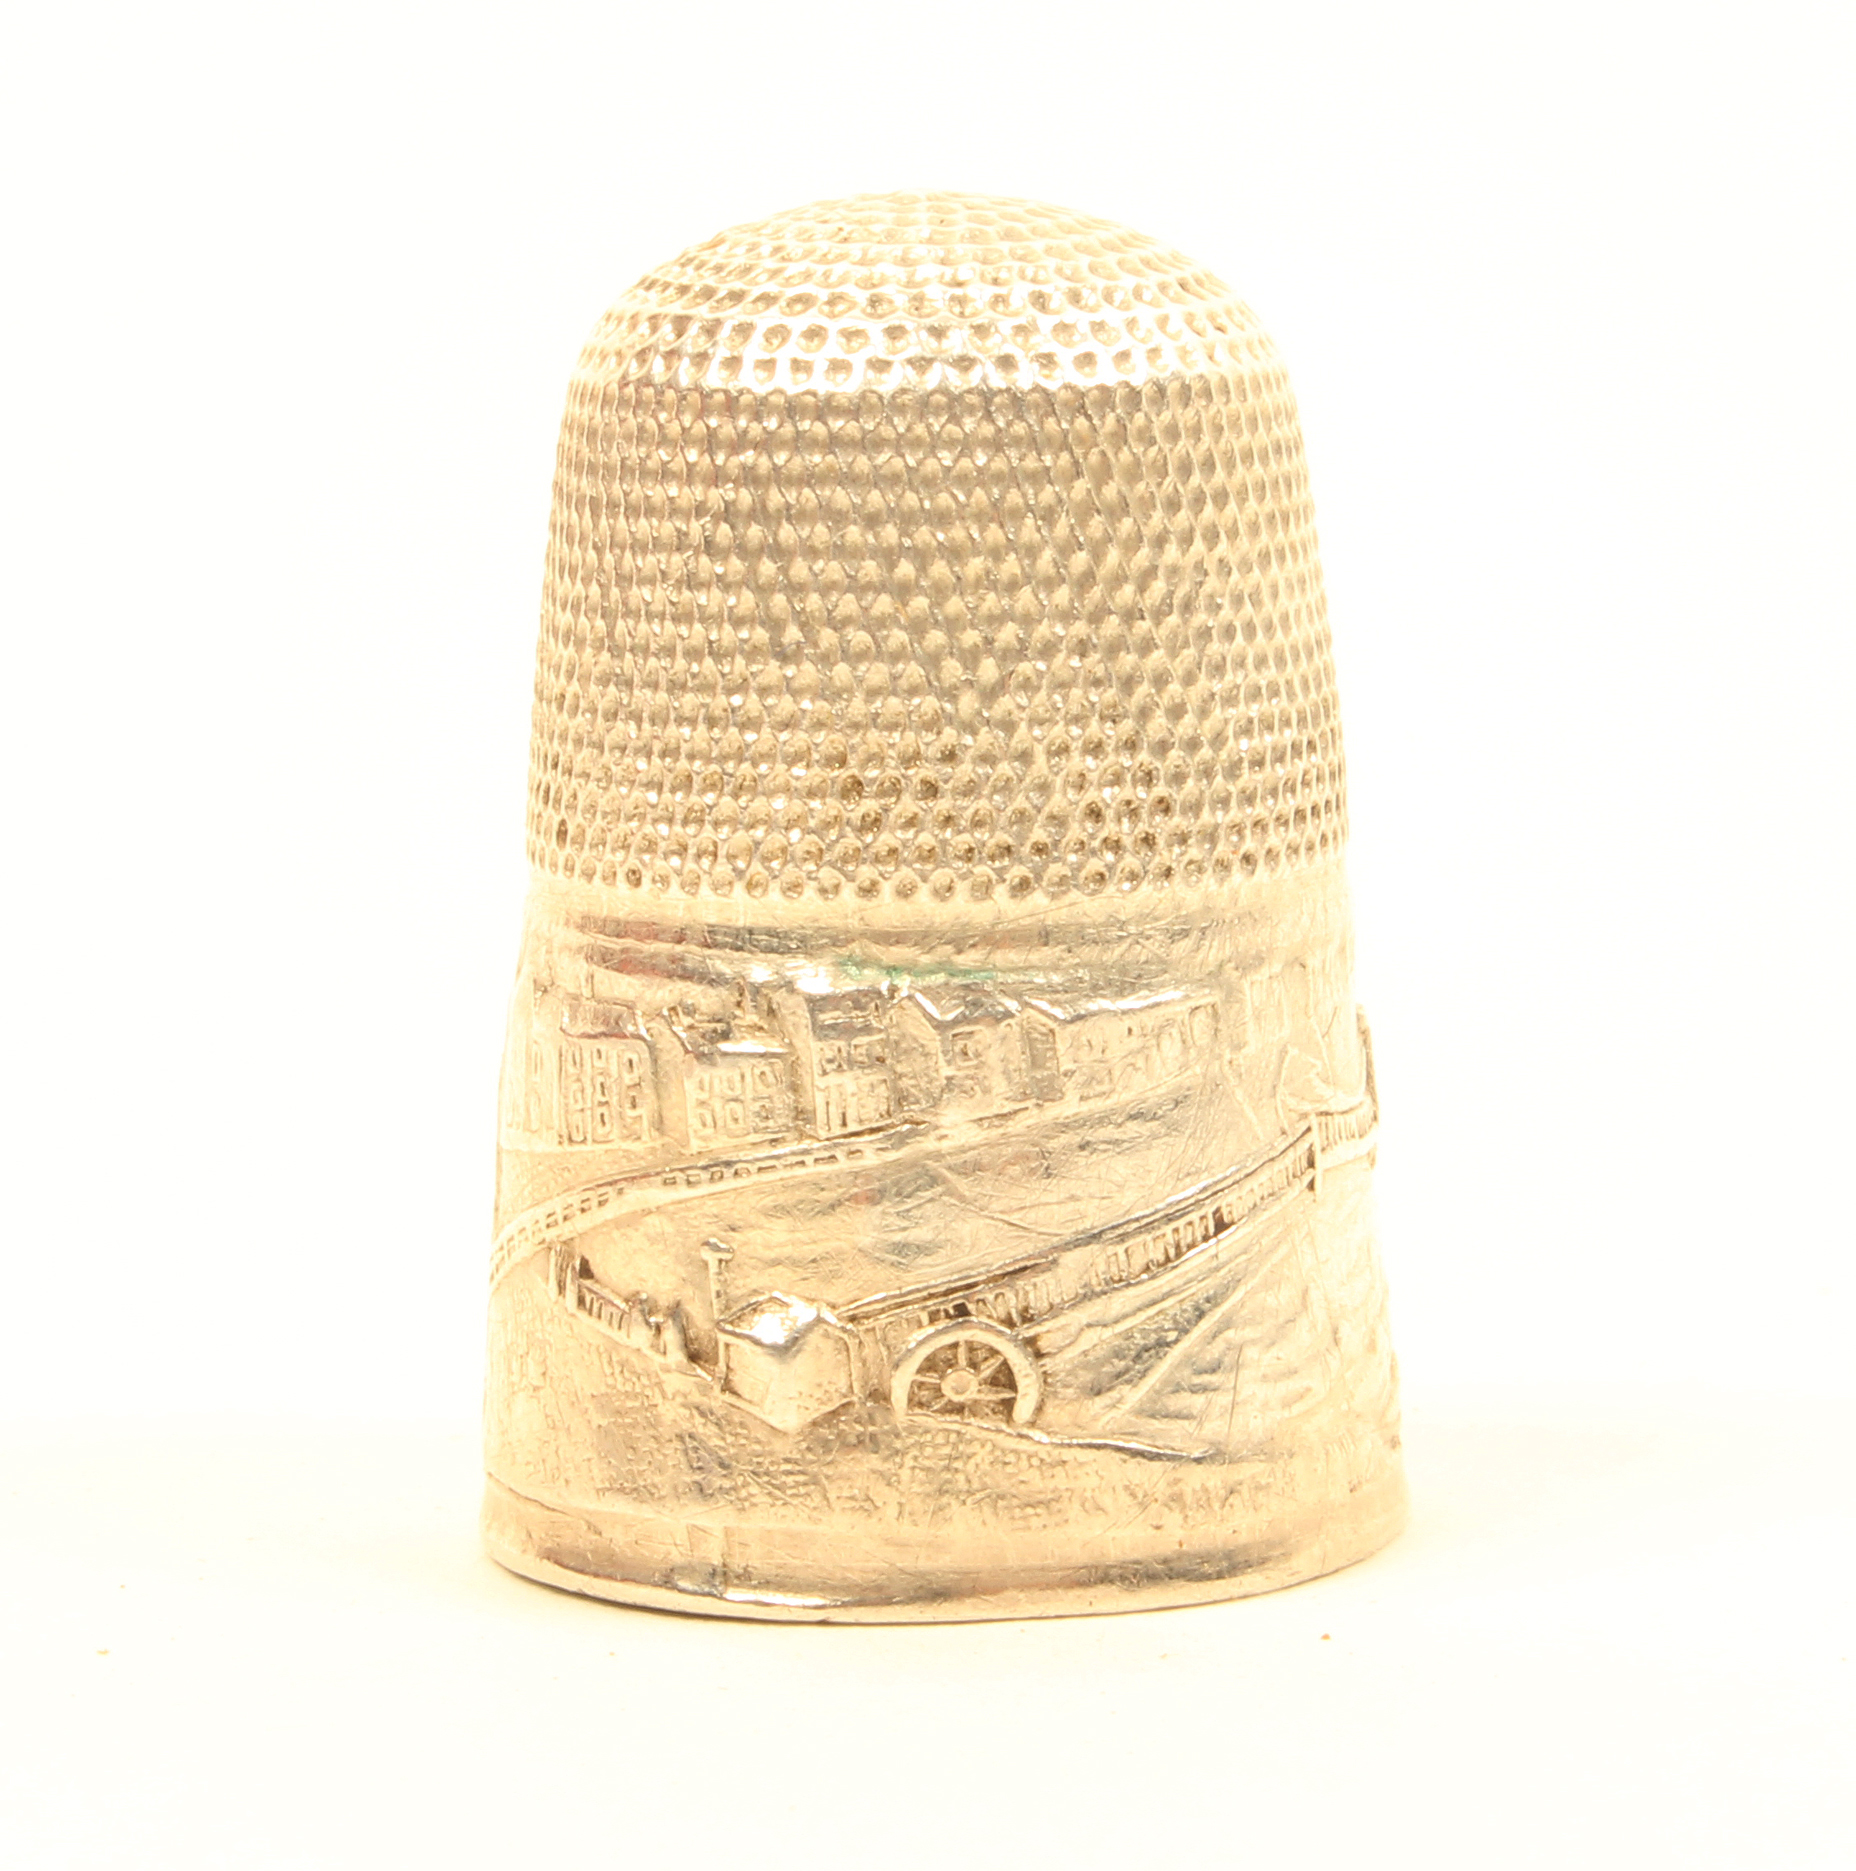 A mid 19th Century silver souvenir thimble depicting the Brighton Chain Pier and Parade.